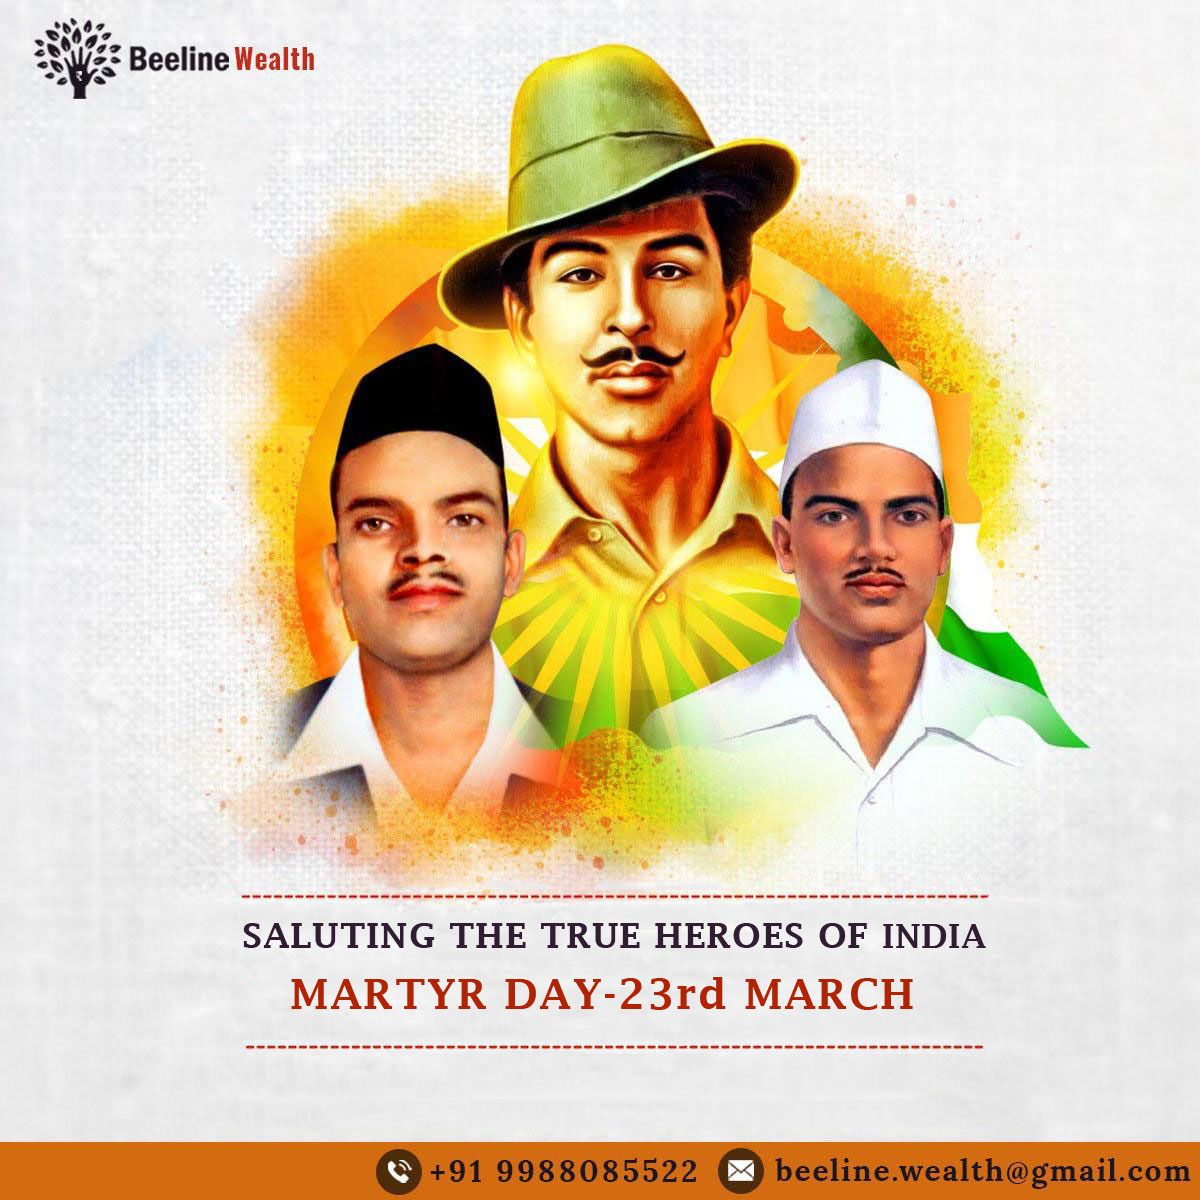 It is easy to kill individuals but you cannot kill the ideas. Remembering the symbols of. Bhagat singh wallpaper, Bhagat singh, Social media design inspiration